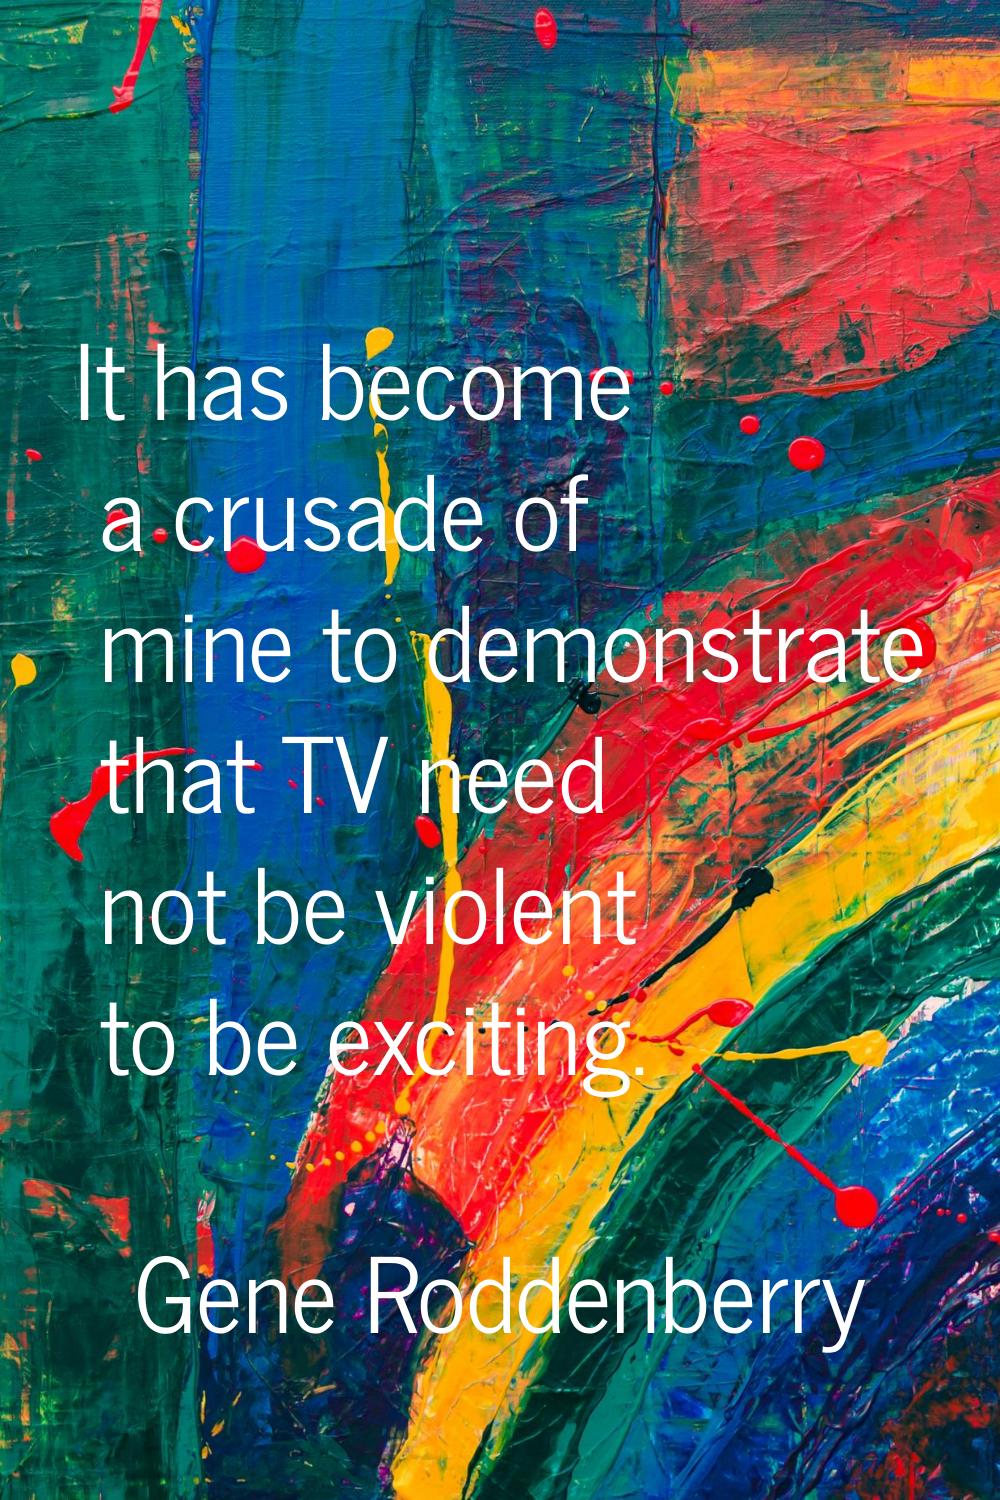 It has become a crusade of mine to demonstrate that TV need not be violent to be exciting.